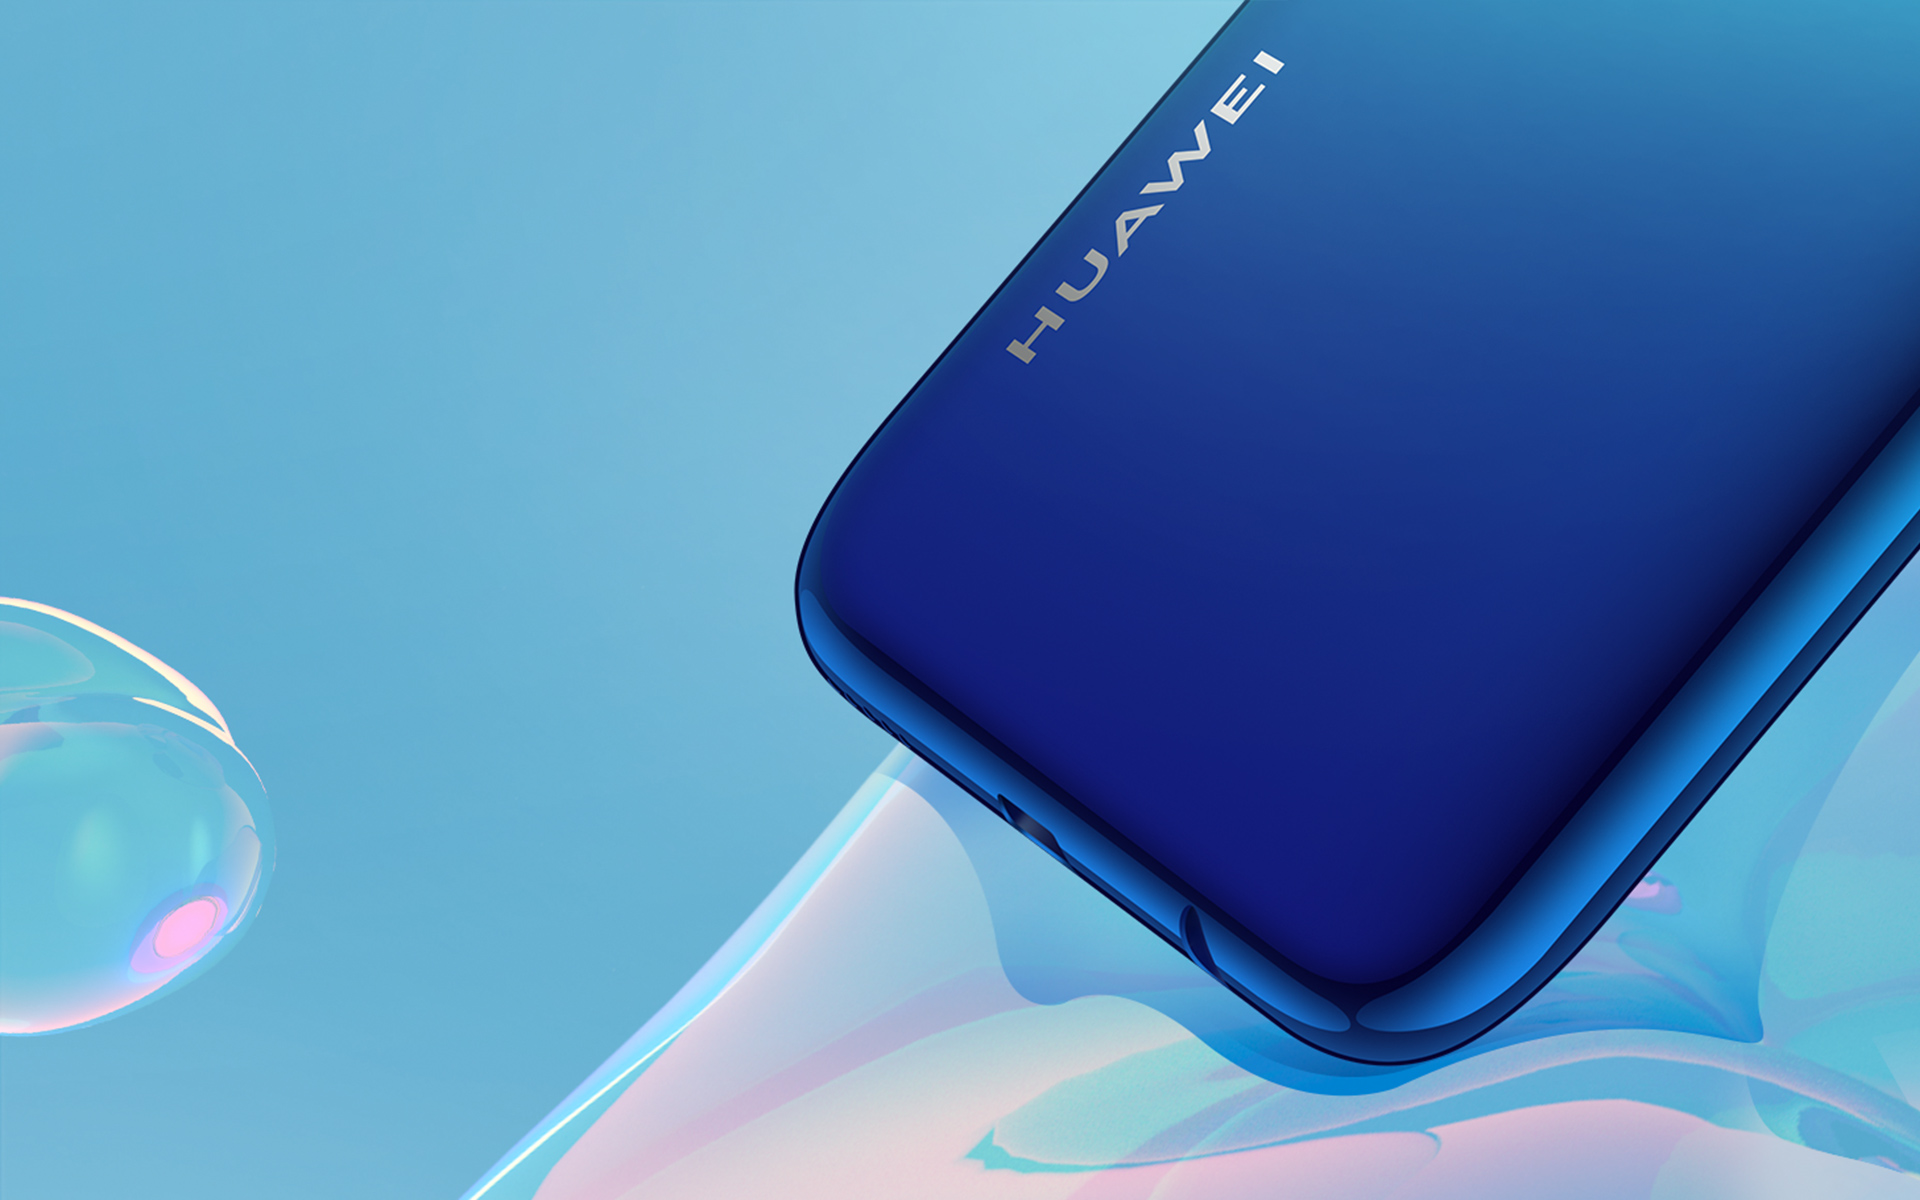 huawei p smart 2020 3D curved design